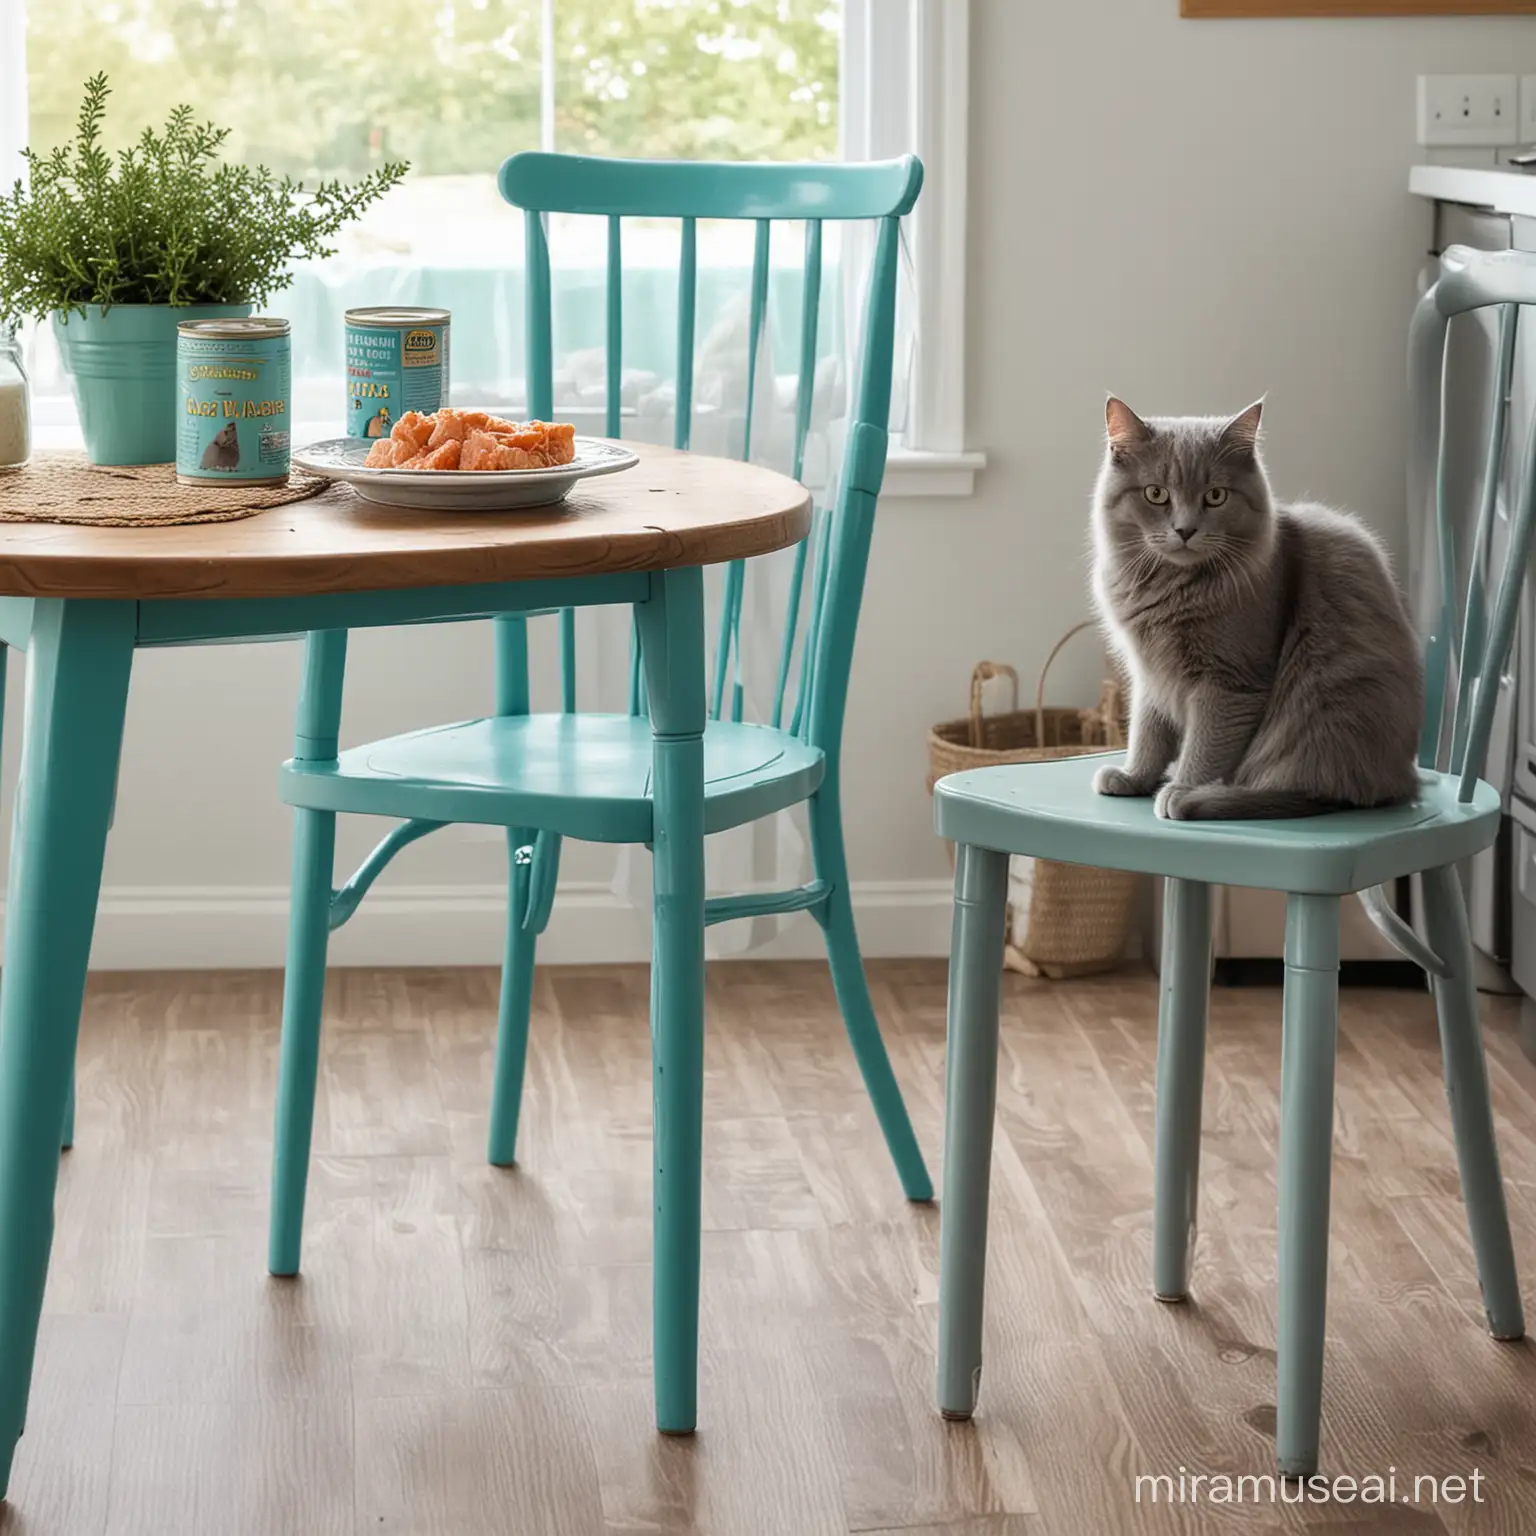 Turquoise Kitchen Table with Fluffy Gray Cat and Fish Preserves